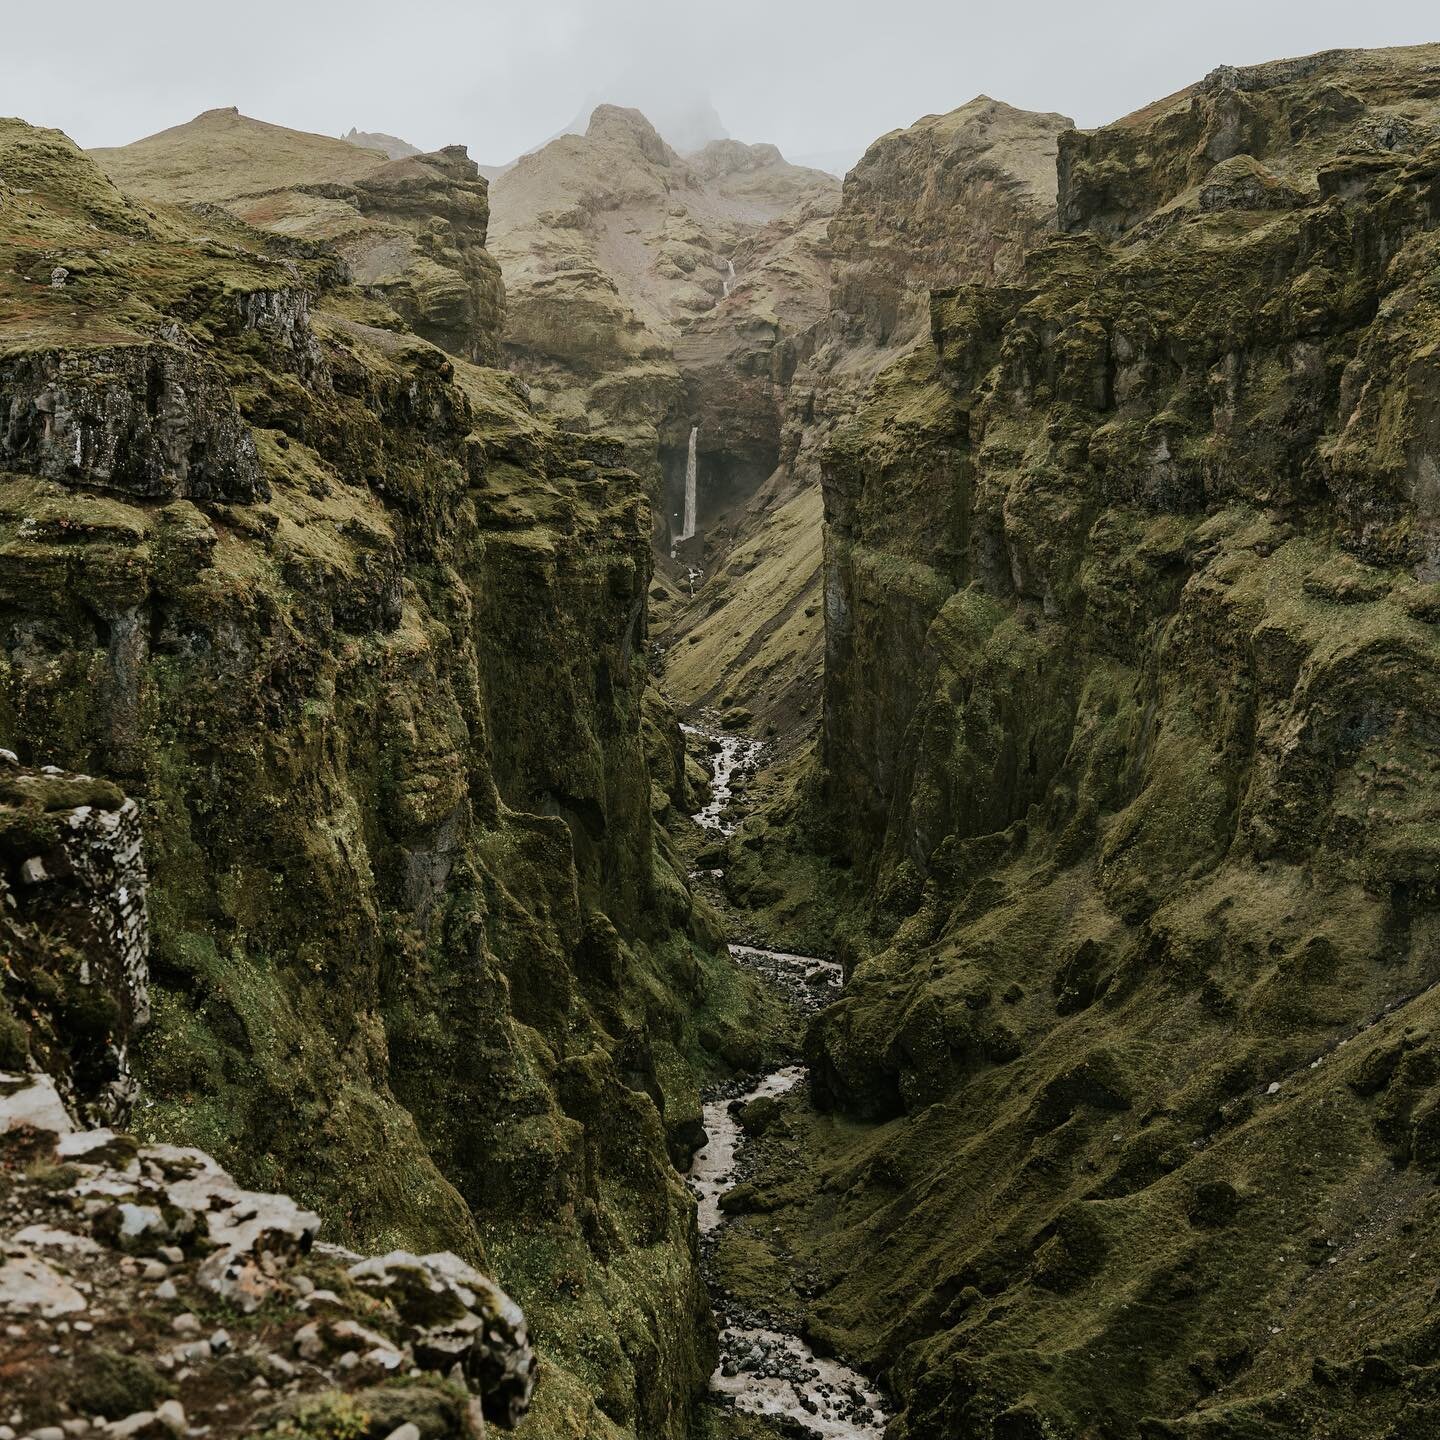 Sharing some photos of Iceland because A. They&rsquo;re some of my favorite photos I&rsquo;ve ever taken, and these views were some of the most beautiful we&rsquo;ve ever seen. B. Thomas and I are back to wanting to travel. We go through moments of l